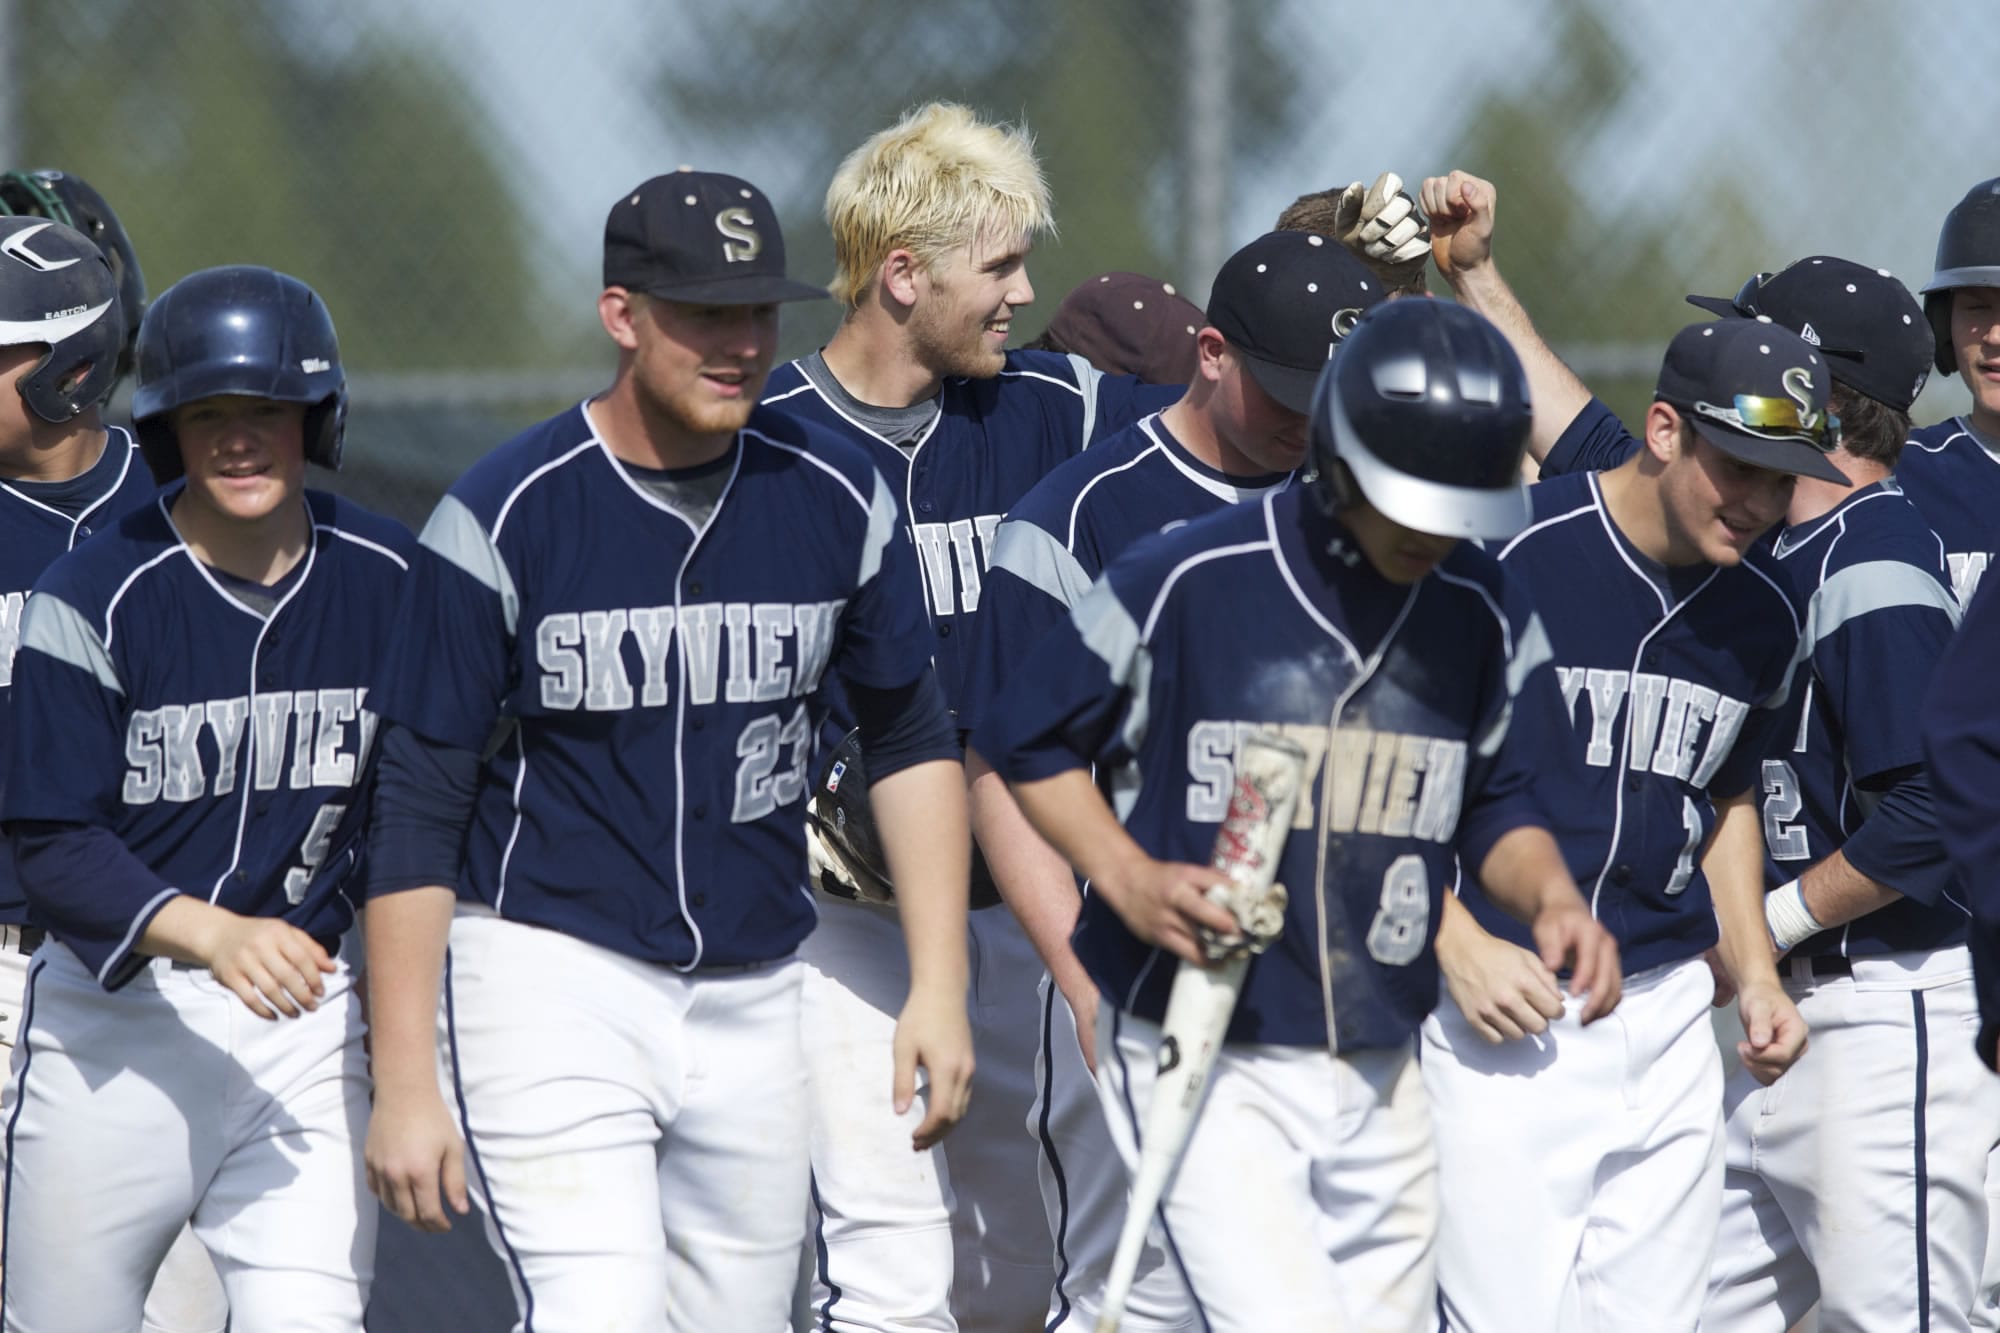 Skyview baseball player Brayden Maney is congratulated by teammates after he hit a grand slam in the league finale Friday against Heritage.